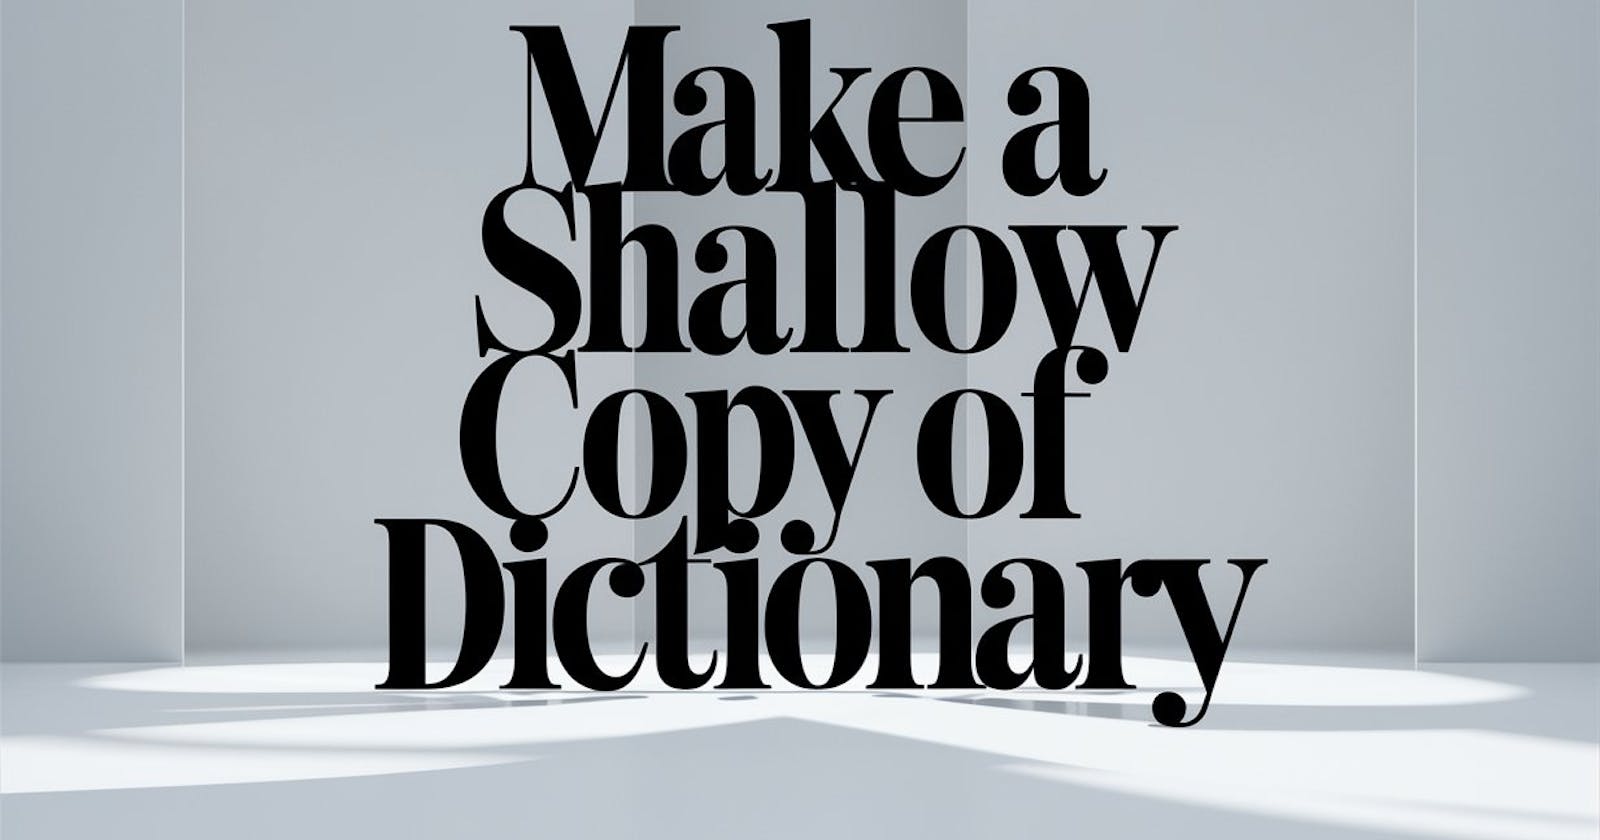 5 Ways to Make a Shallow Copy of a Dictionary Explained